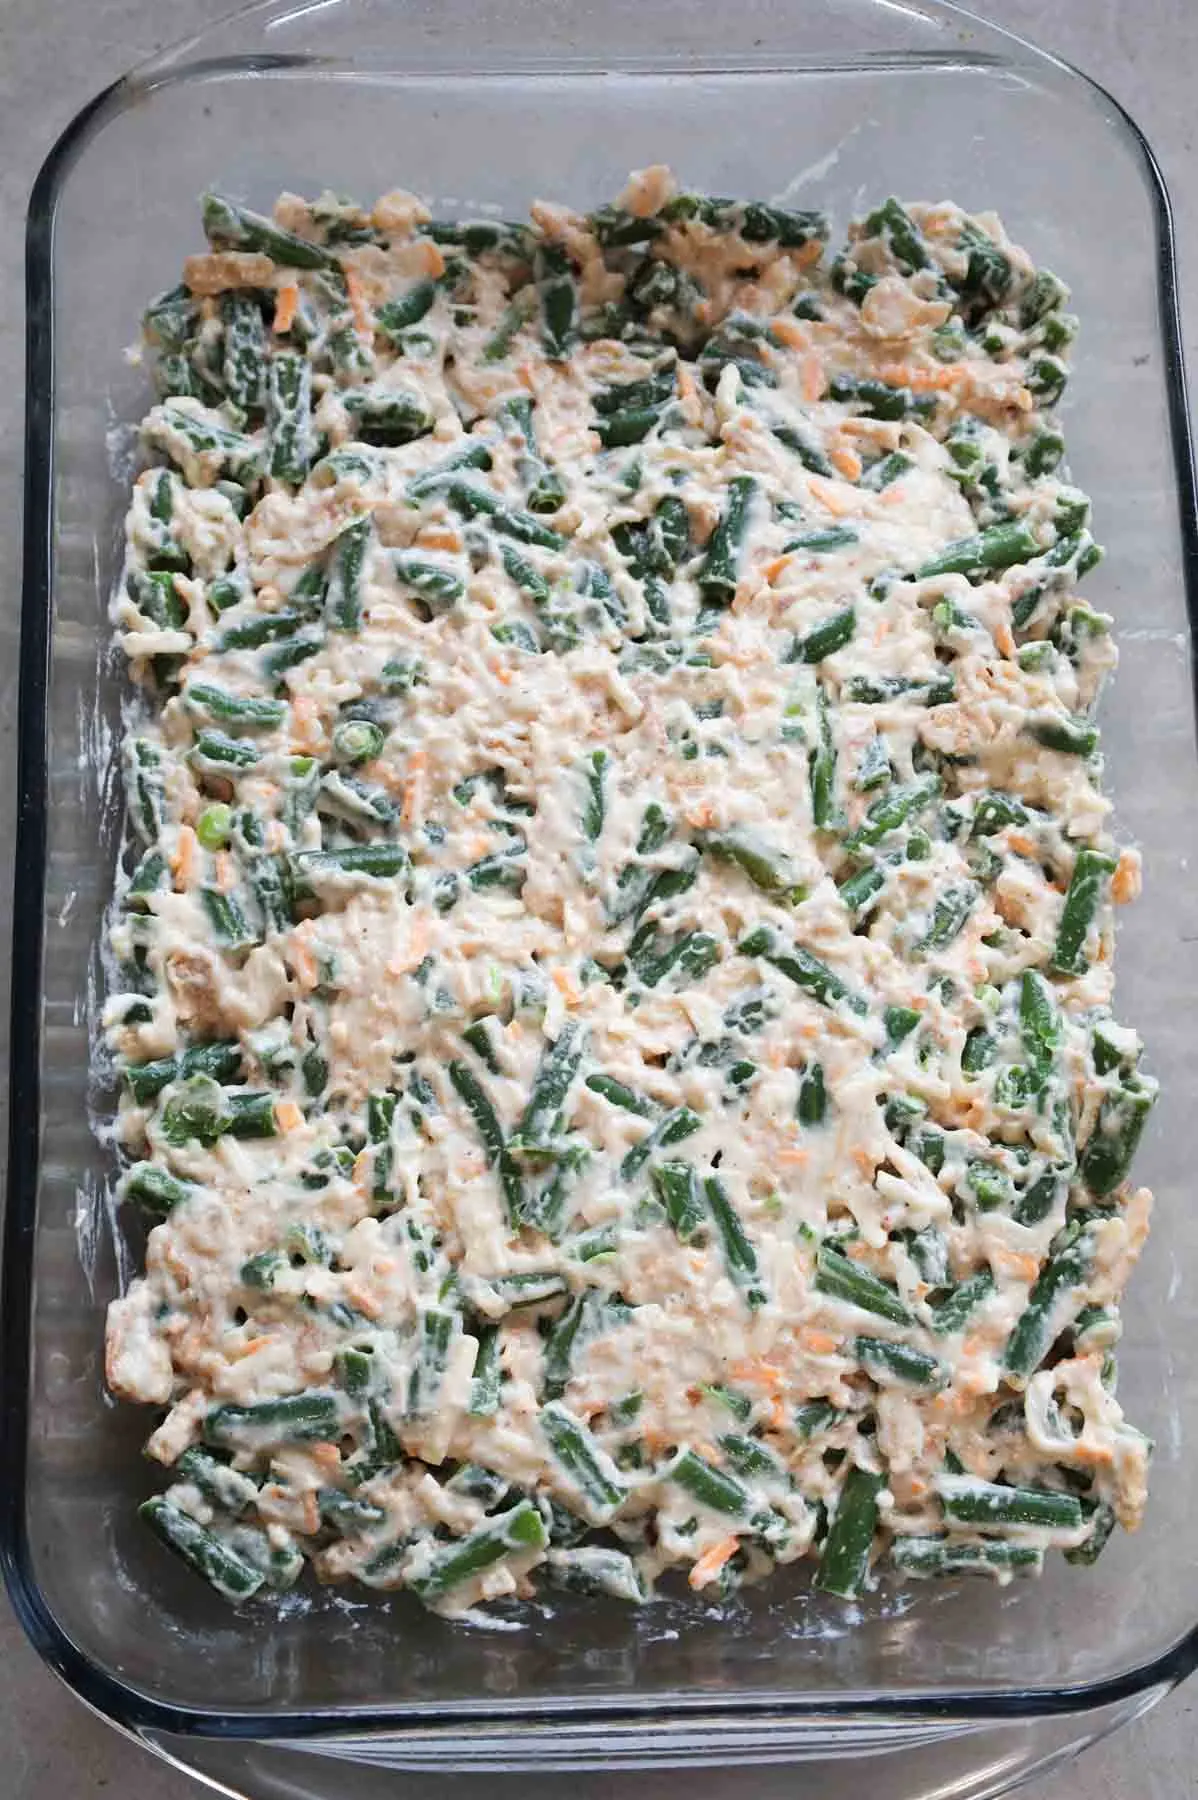 Green Bean Stuffing Casserole - THIS IS NOT DIET FOOD